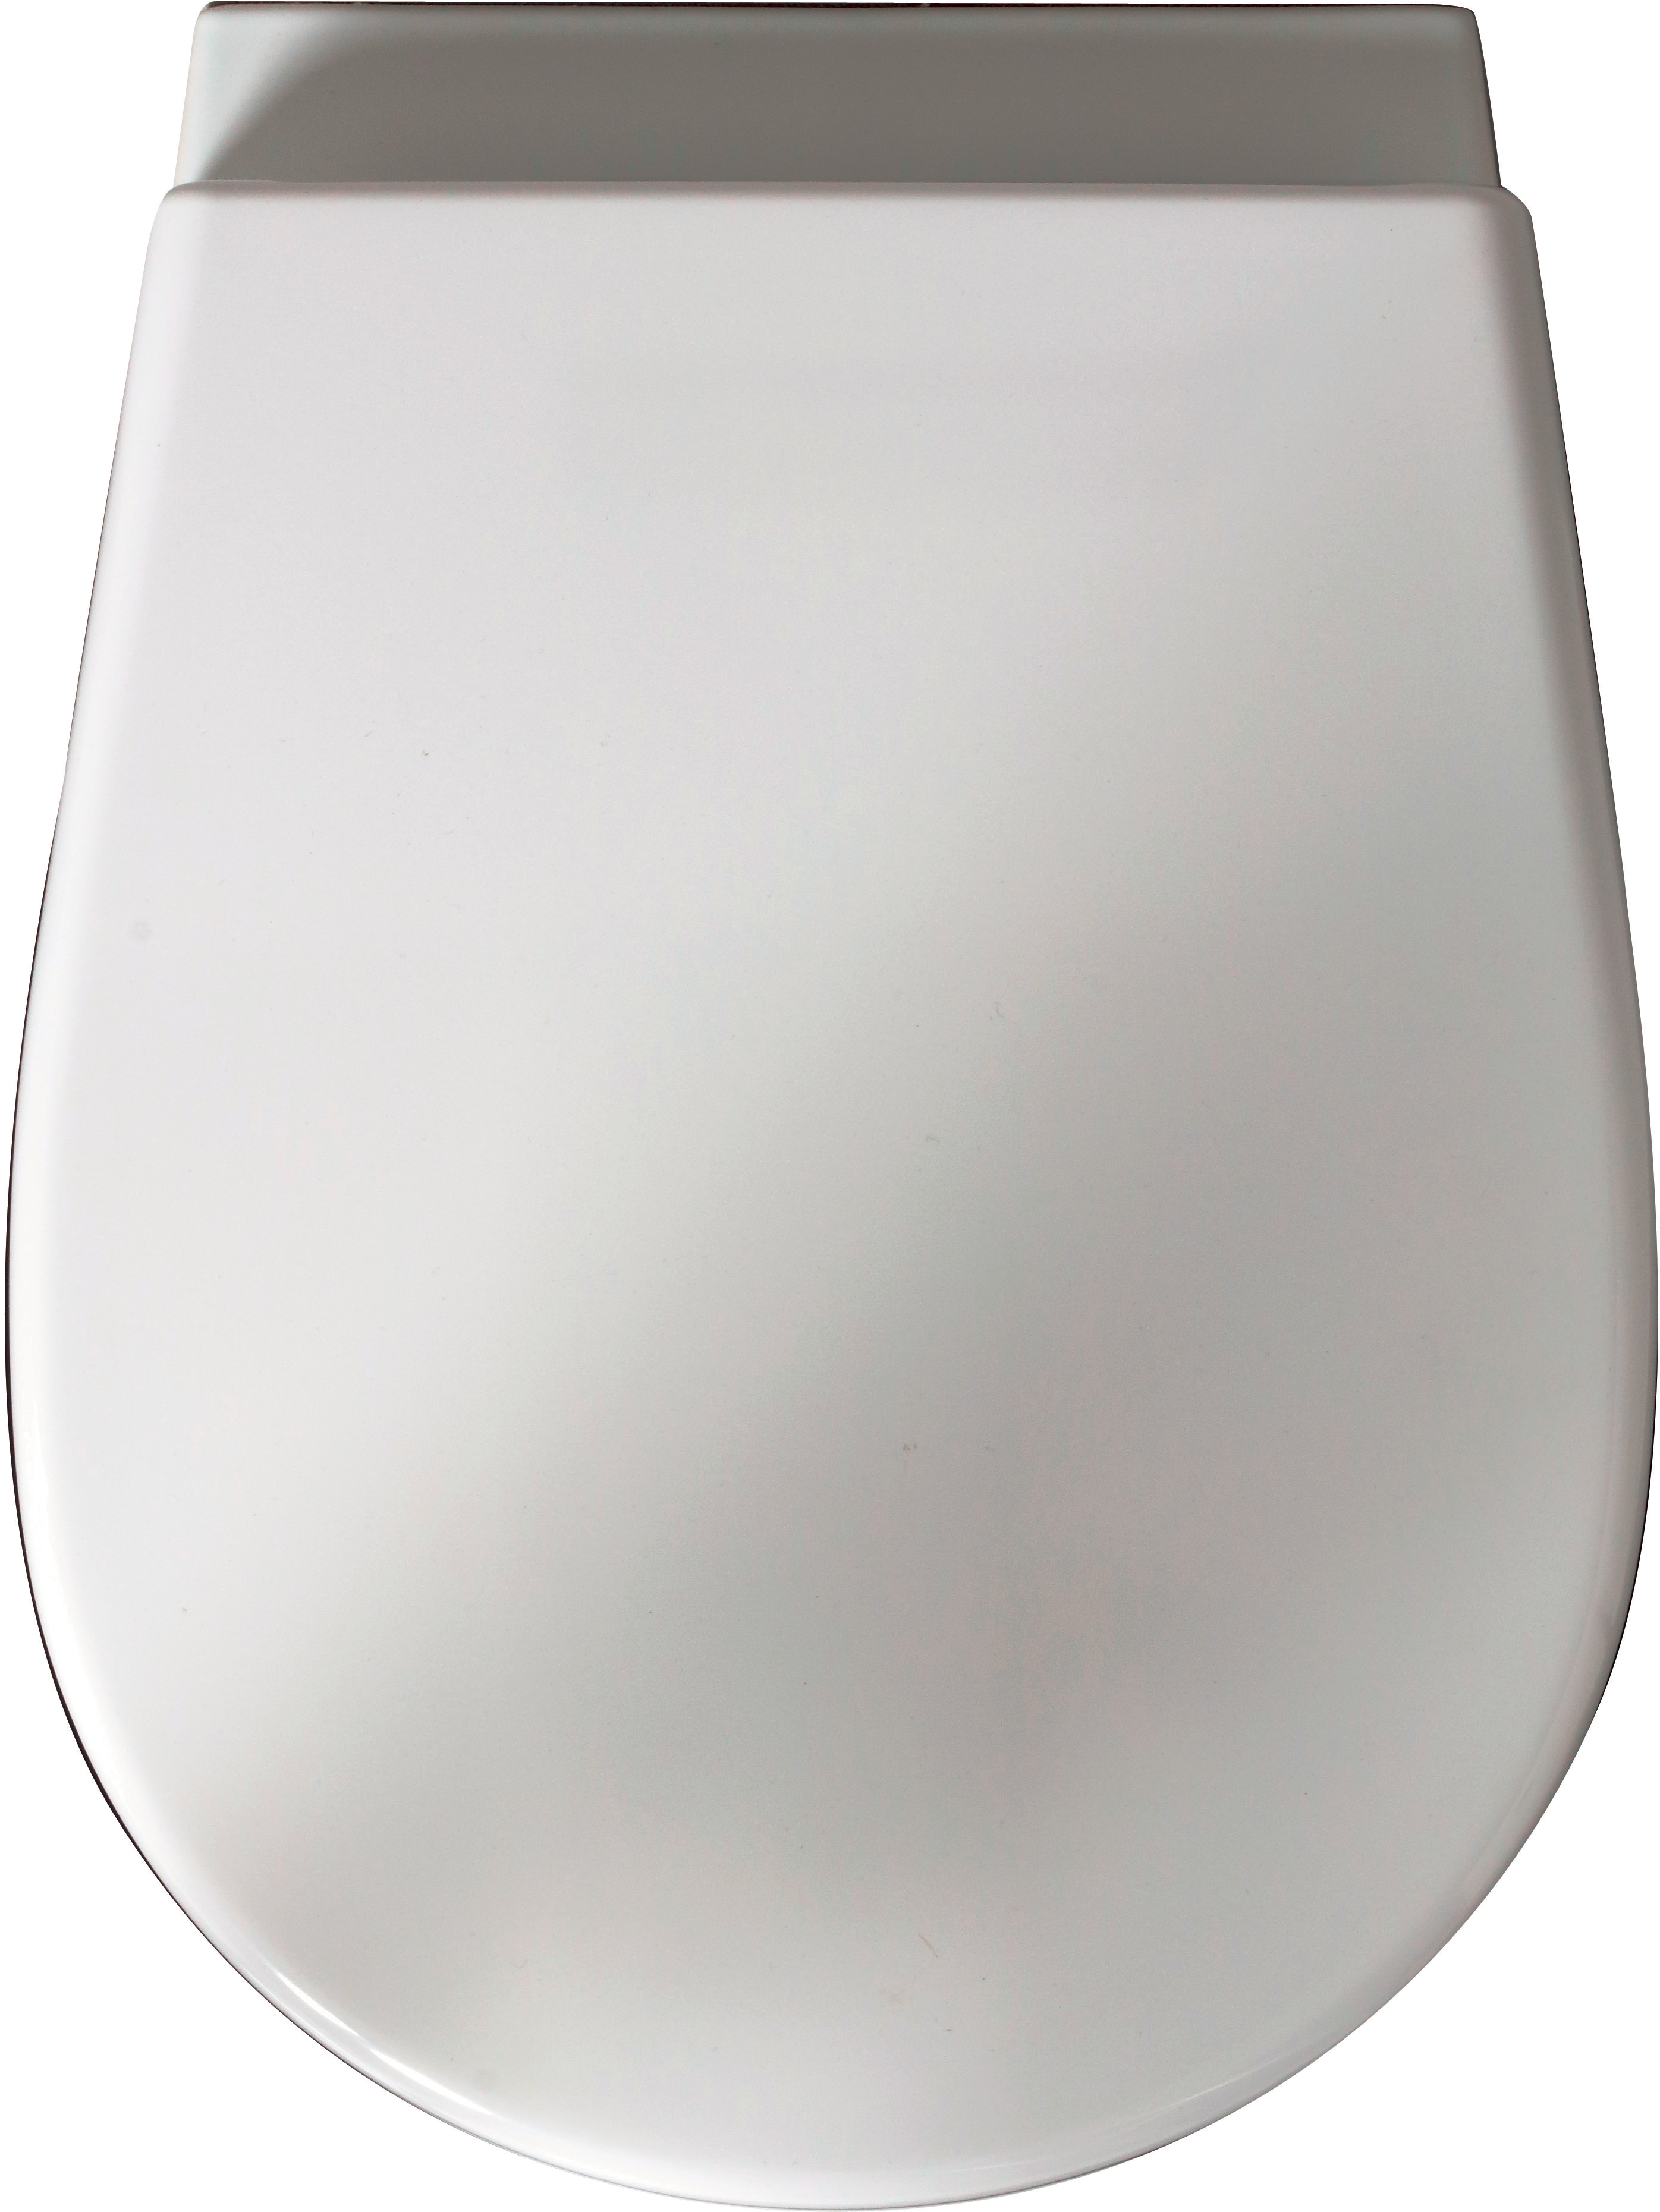 4215 - “ - Toilet Seat (3070x4092), Png Download